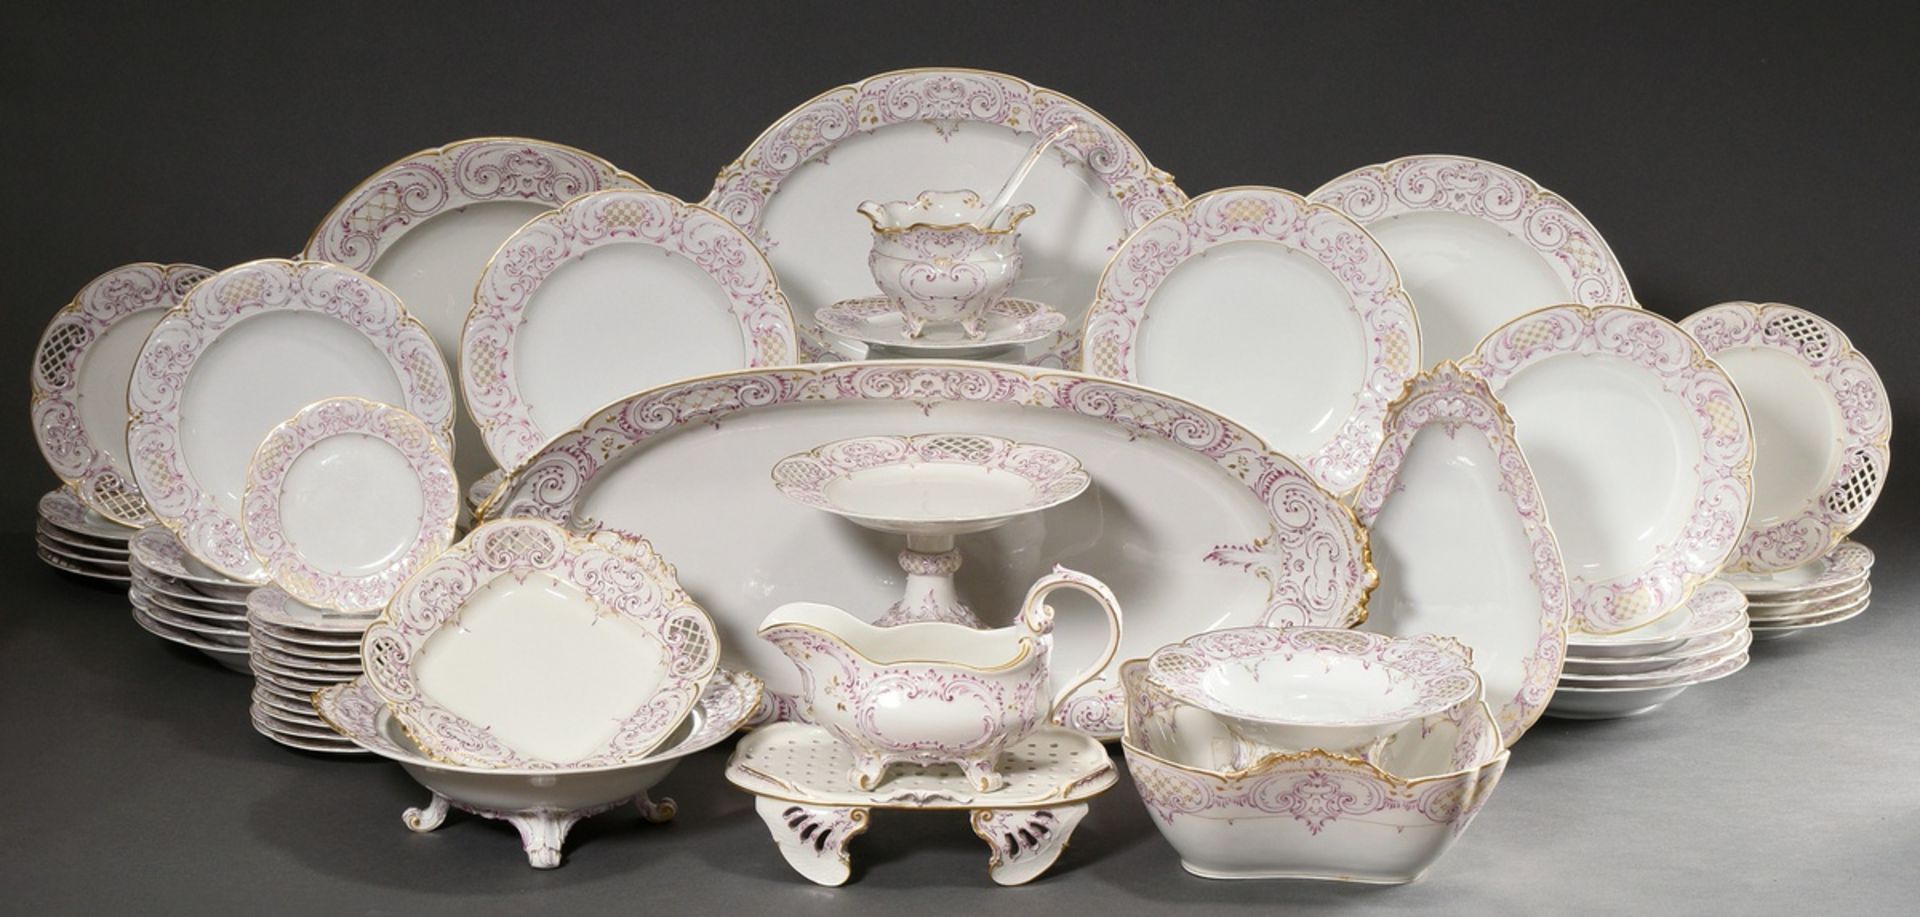 69 Pieces KPM dinner service in Rococo form with purple and gold staffage, red imperial orb mark, c - Image 3 of 22